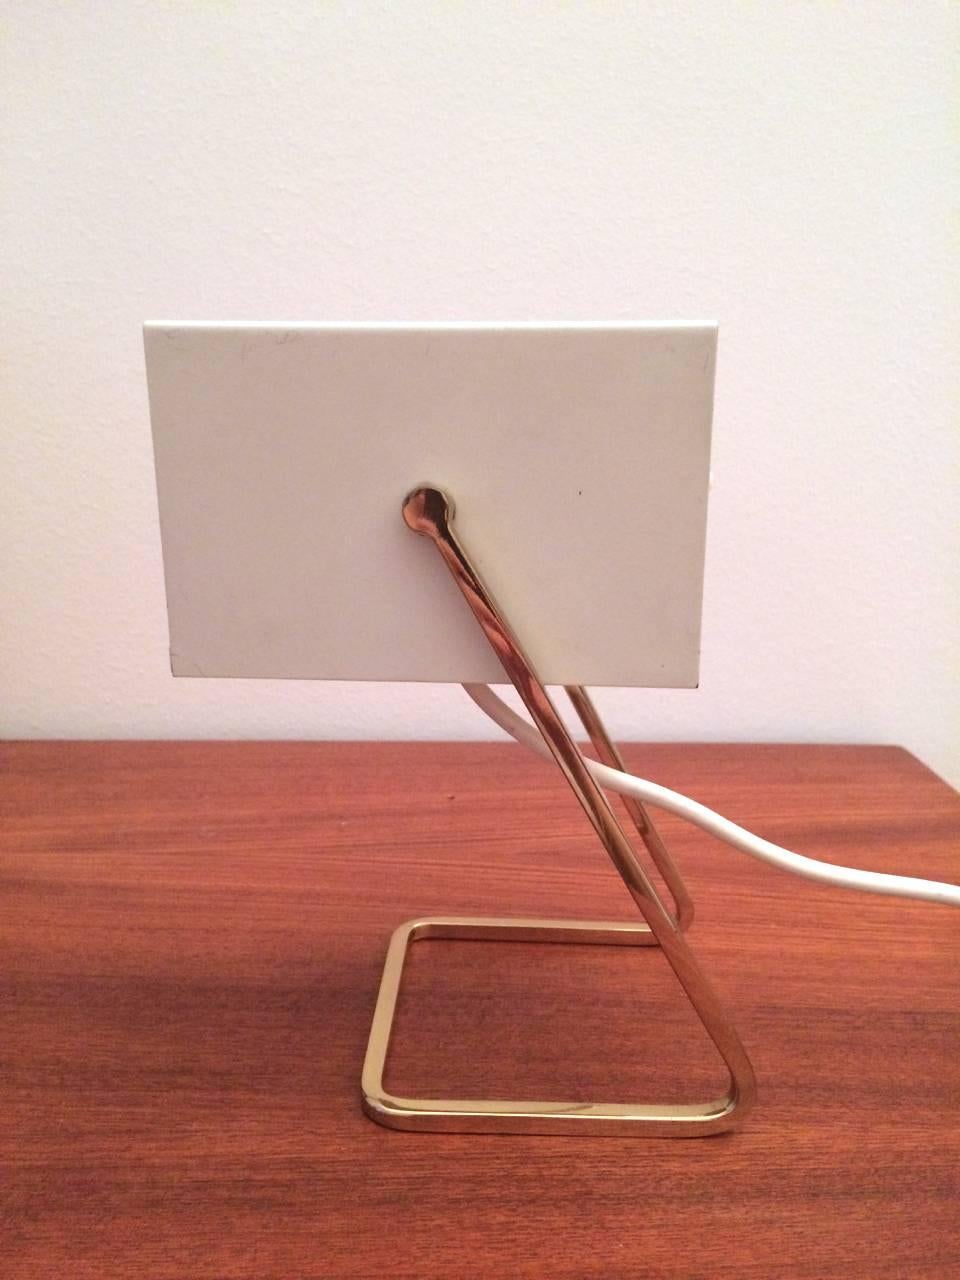 This cube desk lamp, model 45097 / 012, was made by Kaiser Leuchten in the 1960s. It features a white metal shade set on a brass frame. It is fully functioning and takes one 25W E14 bulb.